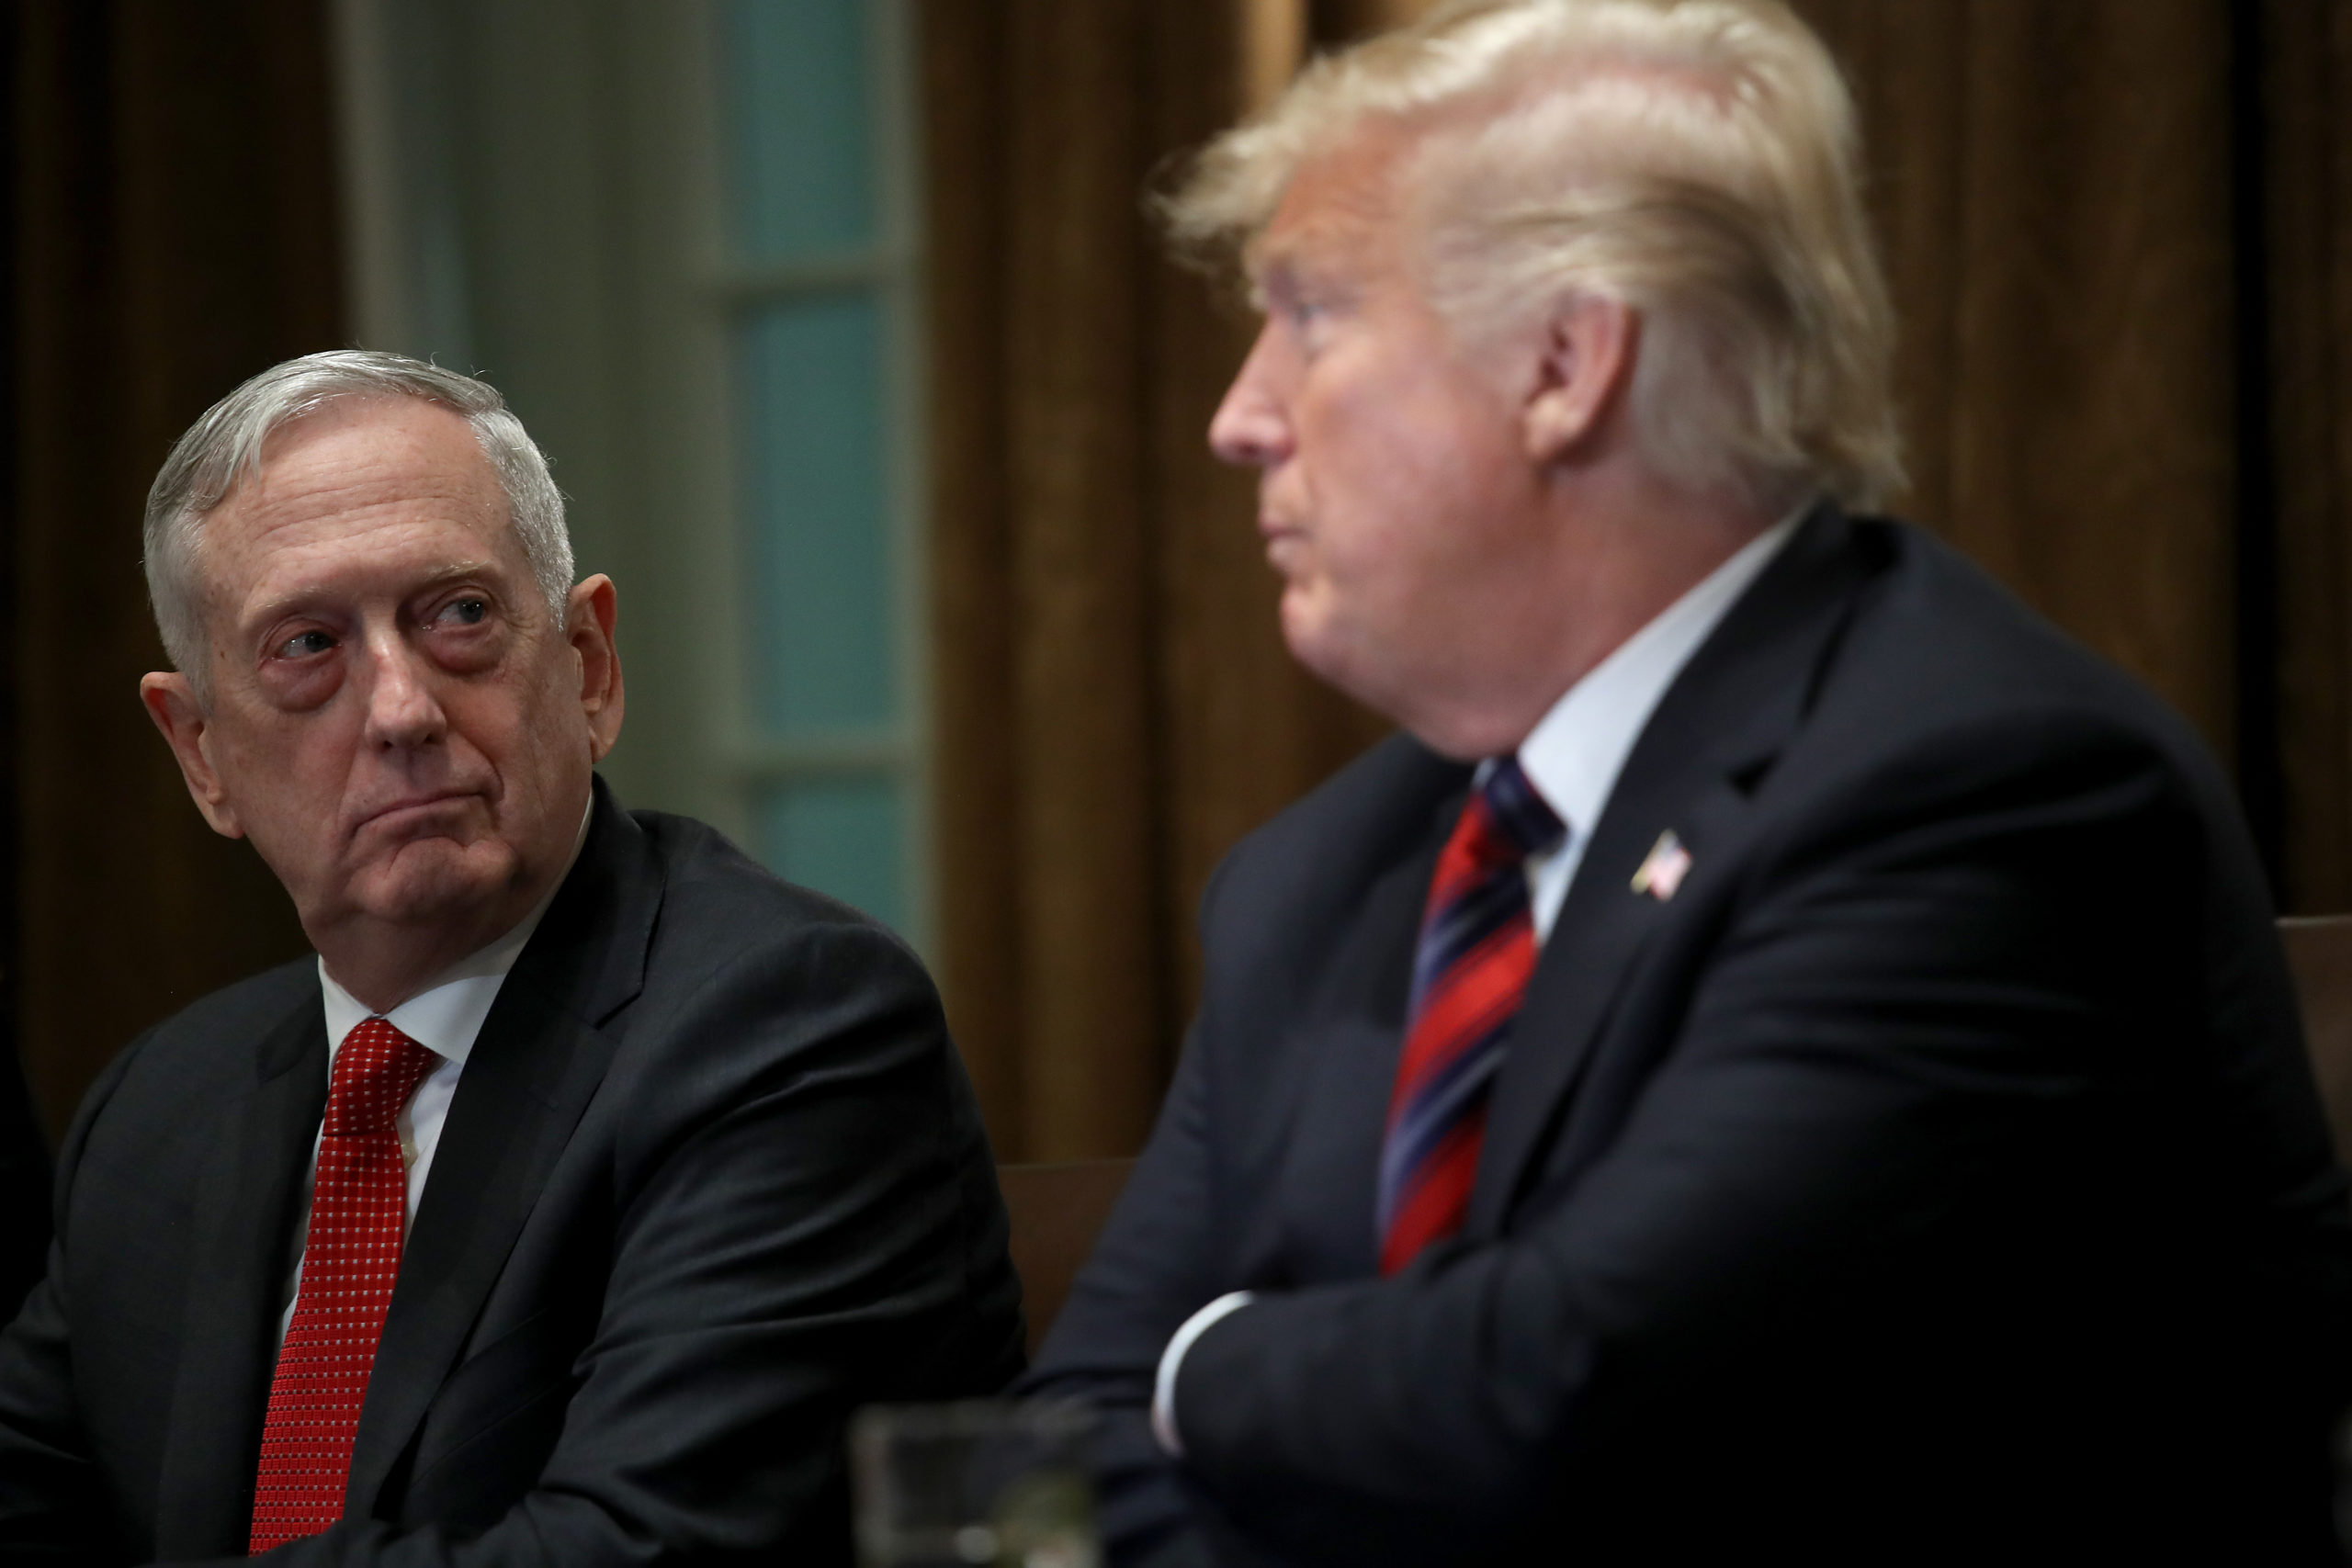 WASHINGTON, DC - OCTOBER 23: U.S. Defense Secretary Jim Mattis listens as U.S. President Donald Trump answers questions during a meeting with military leaders in the Cabinet Room on October 23, 2018 in Washington, DC. Trump discussed a range of issues while press were in the room including current relations with Saudi Arabia, and the use of the U.S. military in protecting the borders of the United States. (Photo by Win McNamee/Getty Images)